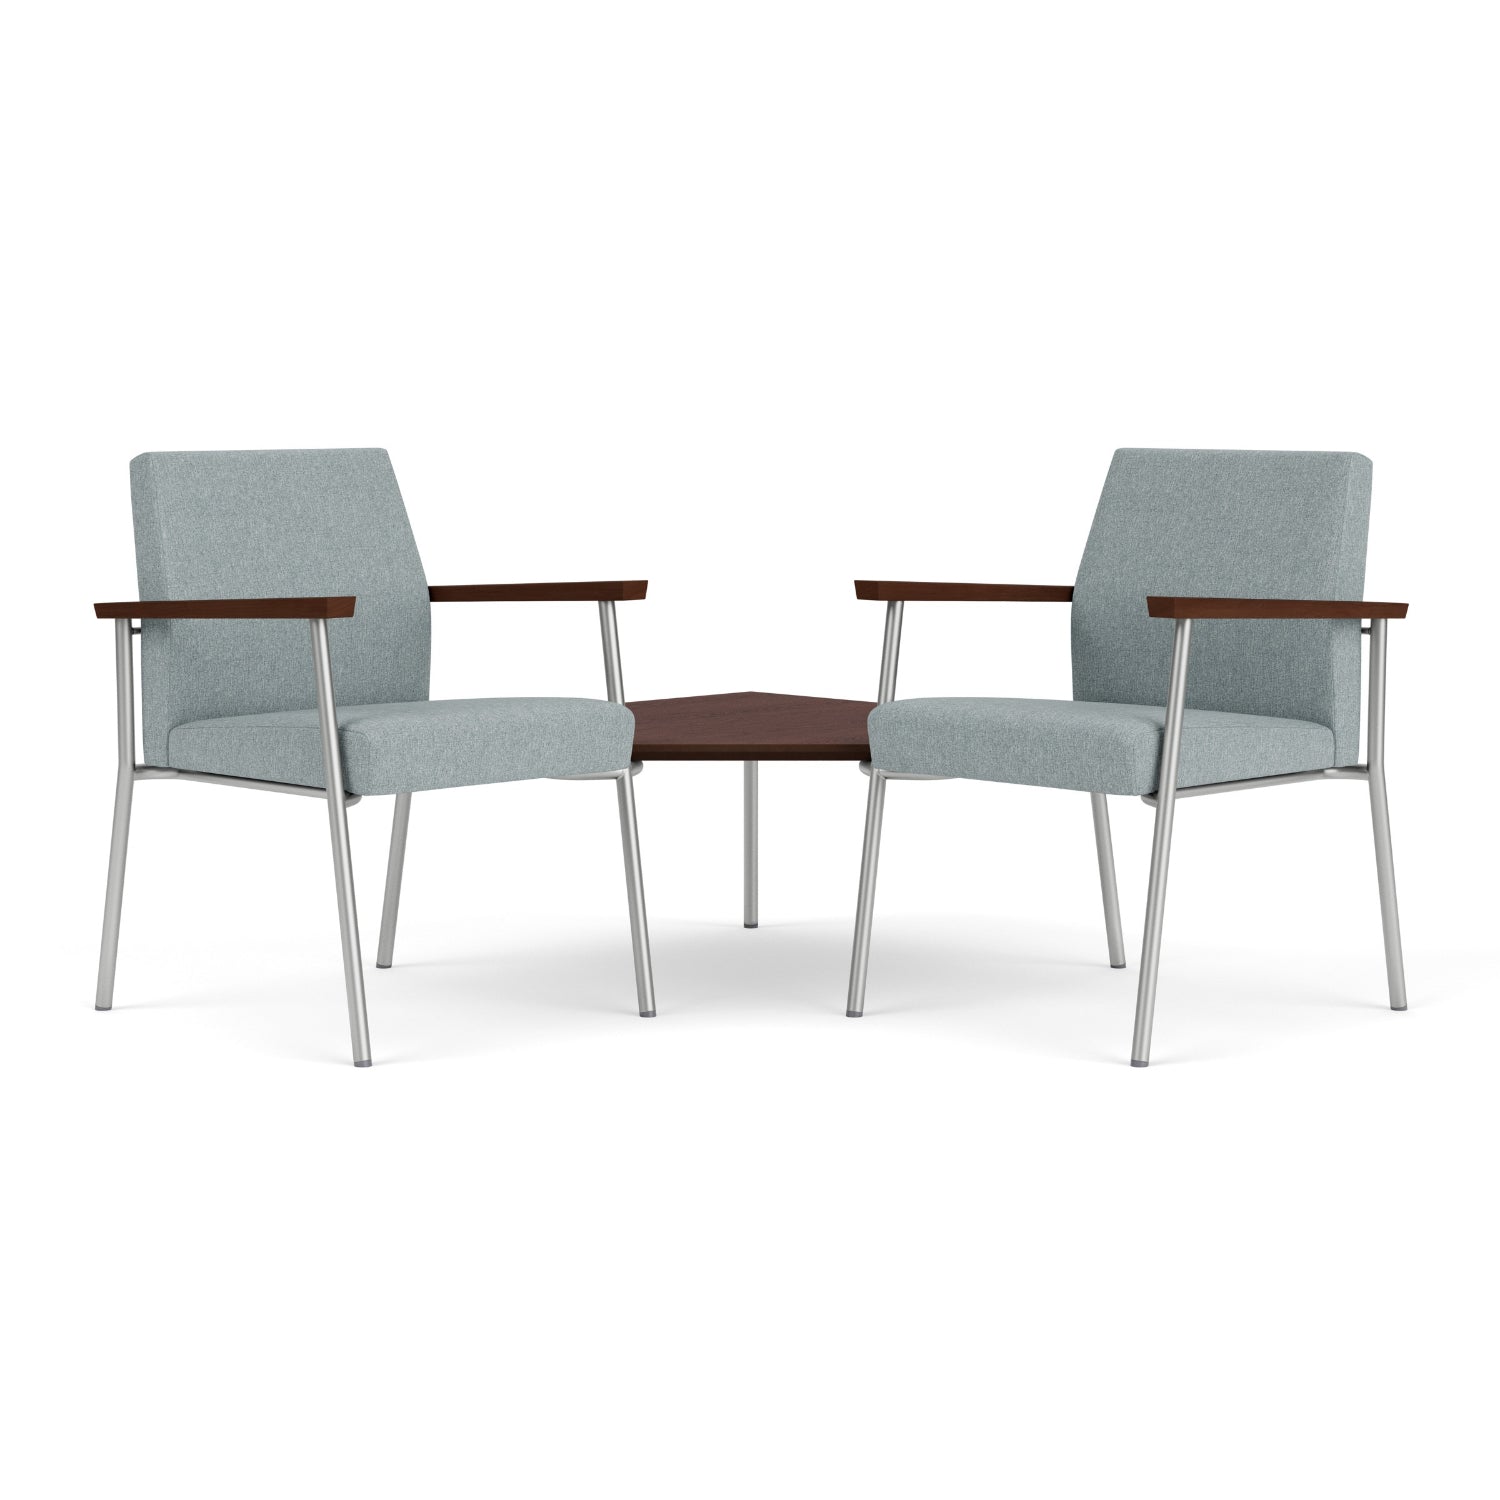 Mystic Guest Collection Reception Seating, 2 Chairs with Connecting Corner Table, Healthcare Vinyl Upholstery, FREE SHIPPING